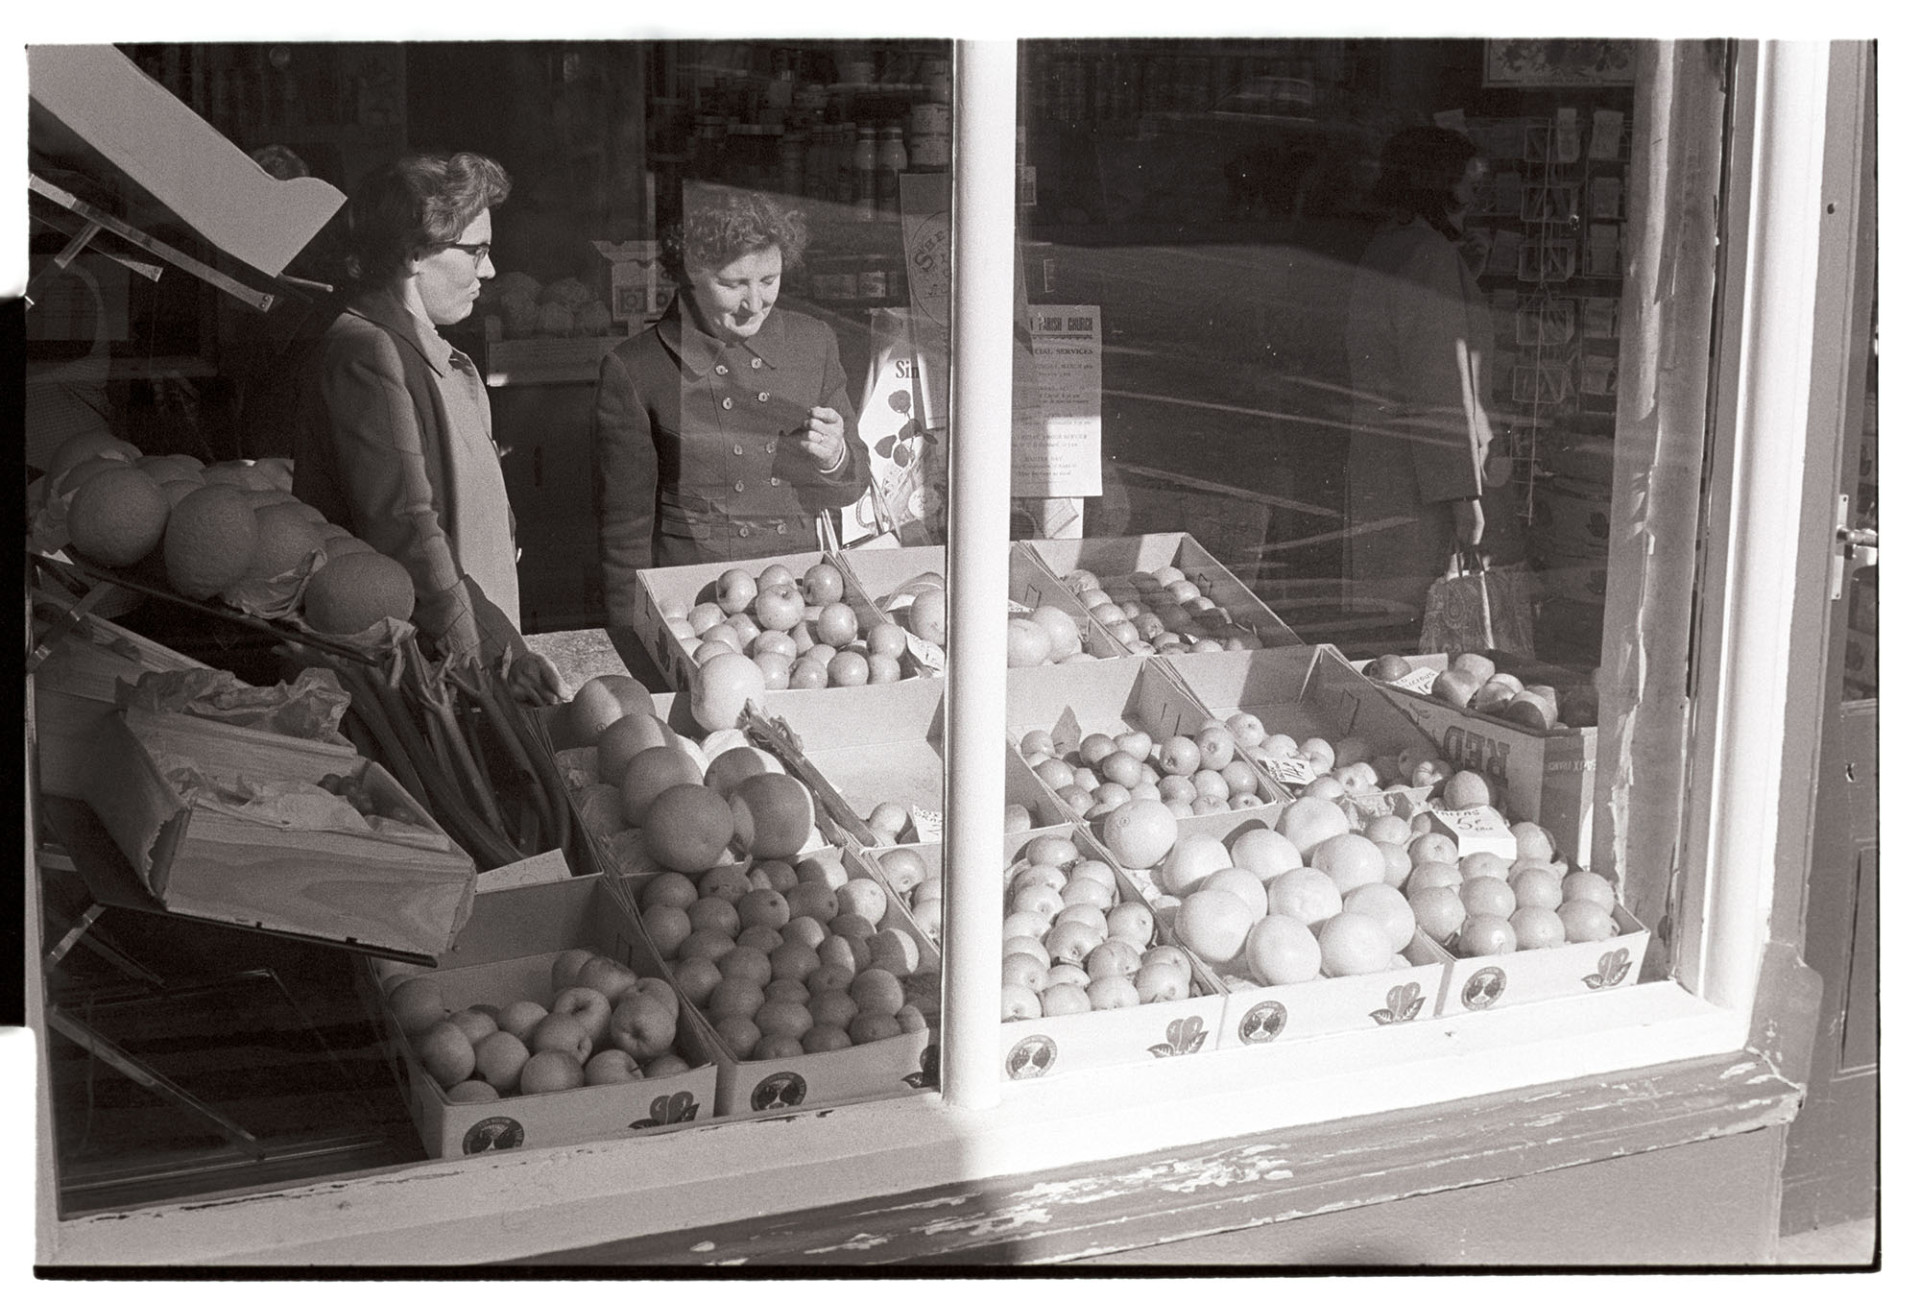 Window of fruit shop with customer.
[Two women, seen through a shop window, inside a greengrocer's shop in Torrington. Fruit, including apples and melons is displayed in the shop window.]